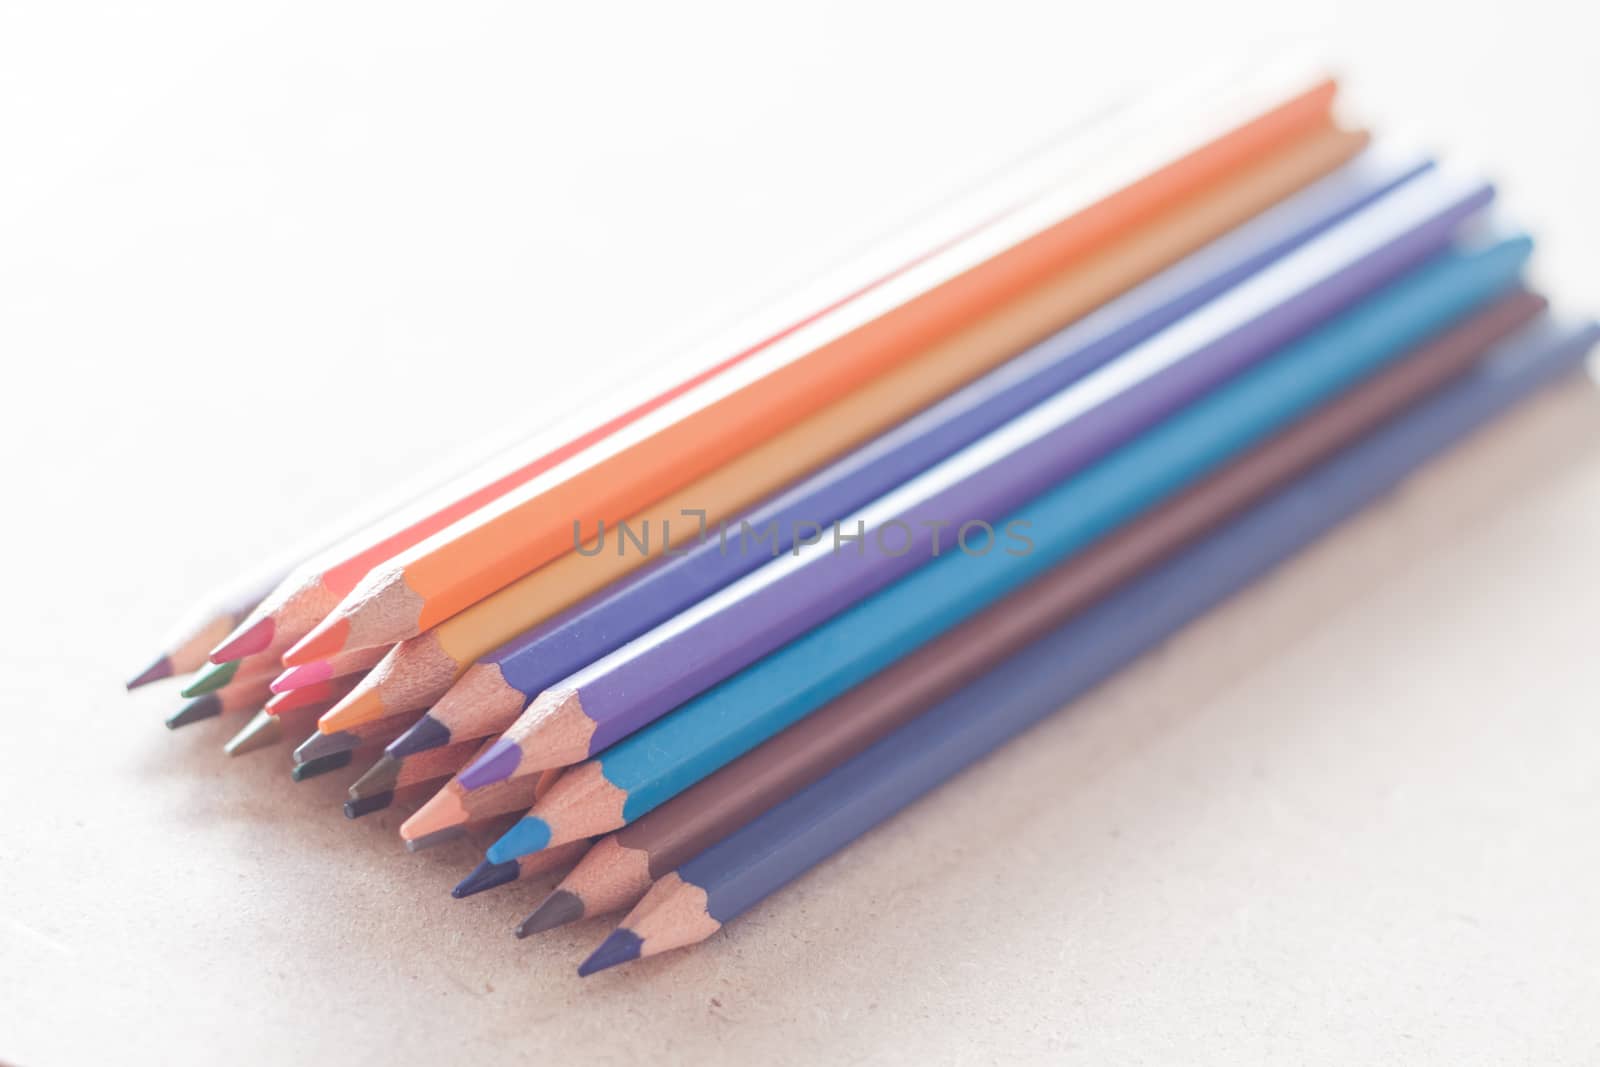 Cluster of colorful pencil crayons by punsayaporn